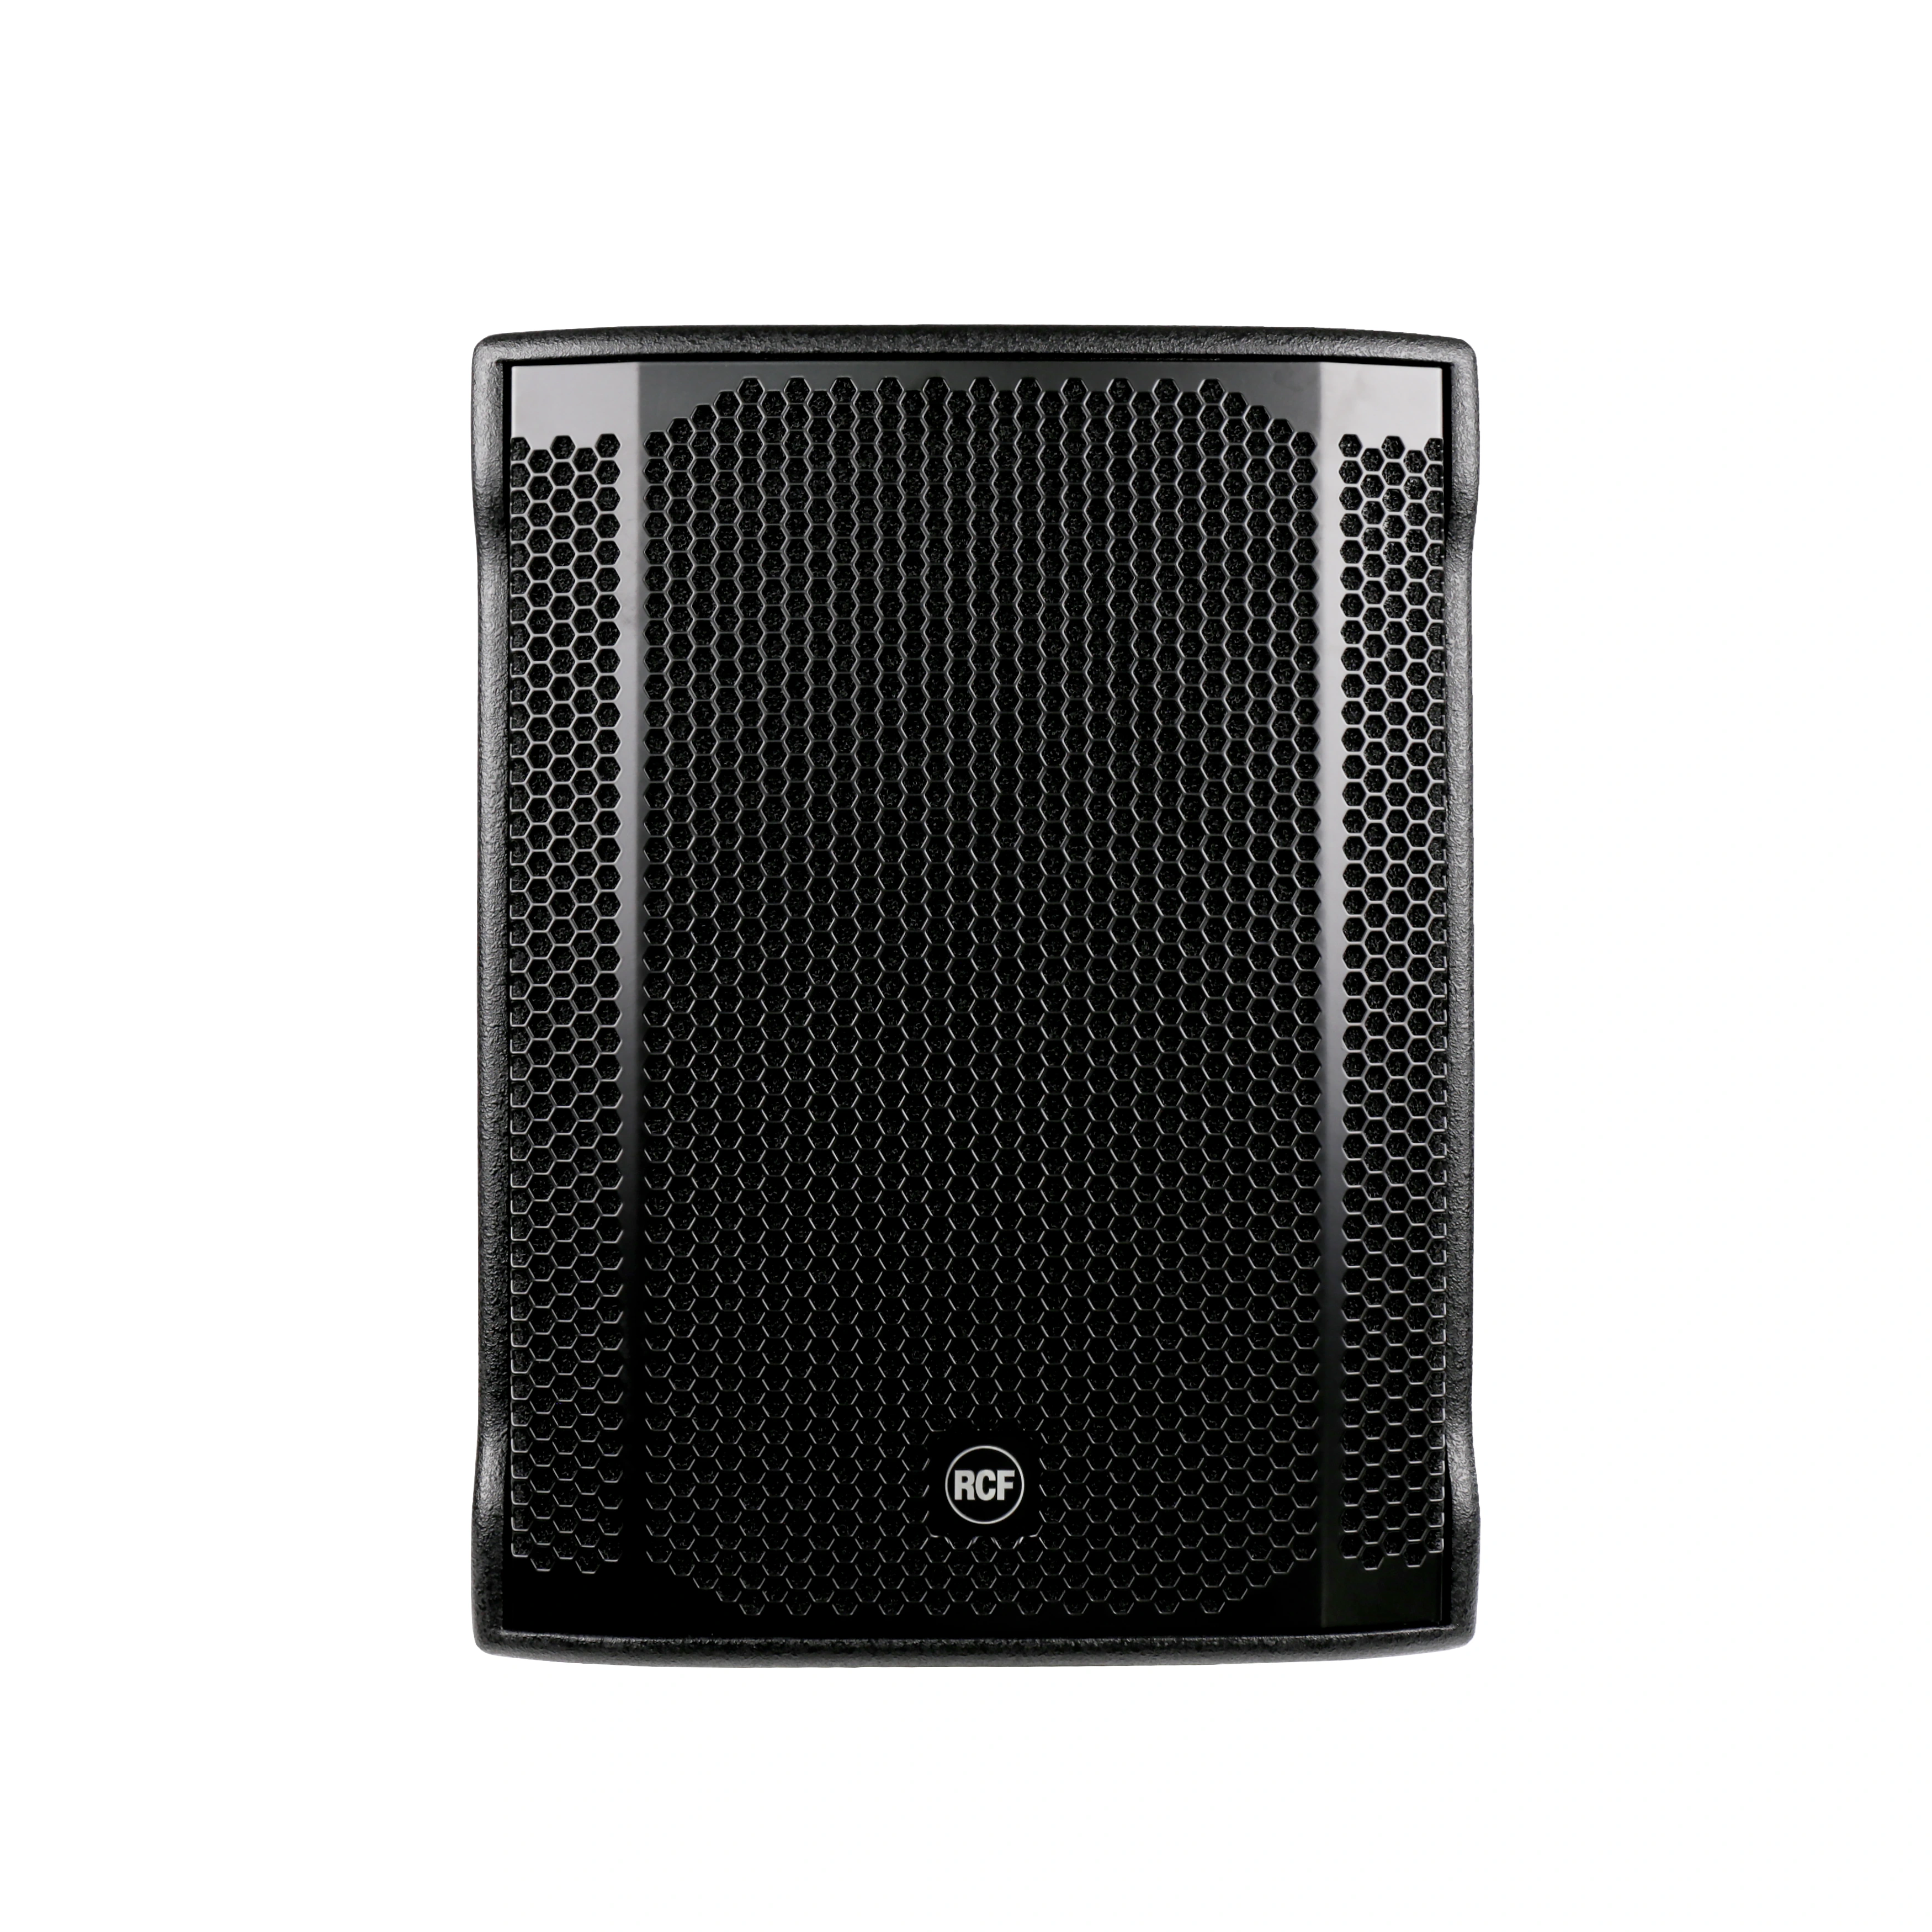 Subwoofere pro - Subwoofer activ RCF SUB 705-AS II, audioclub.ro